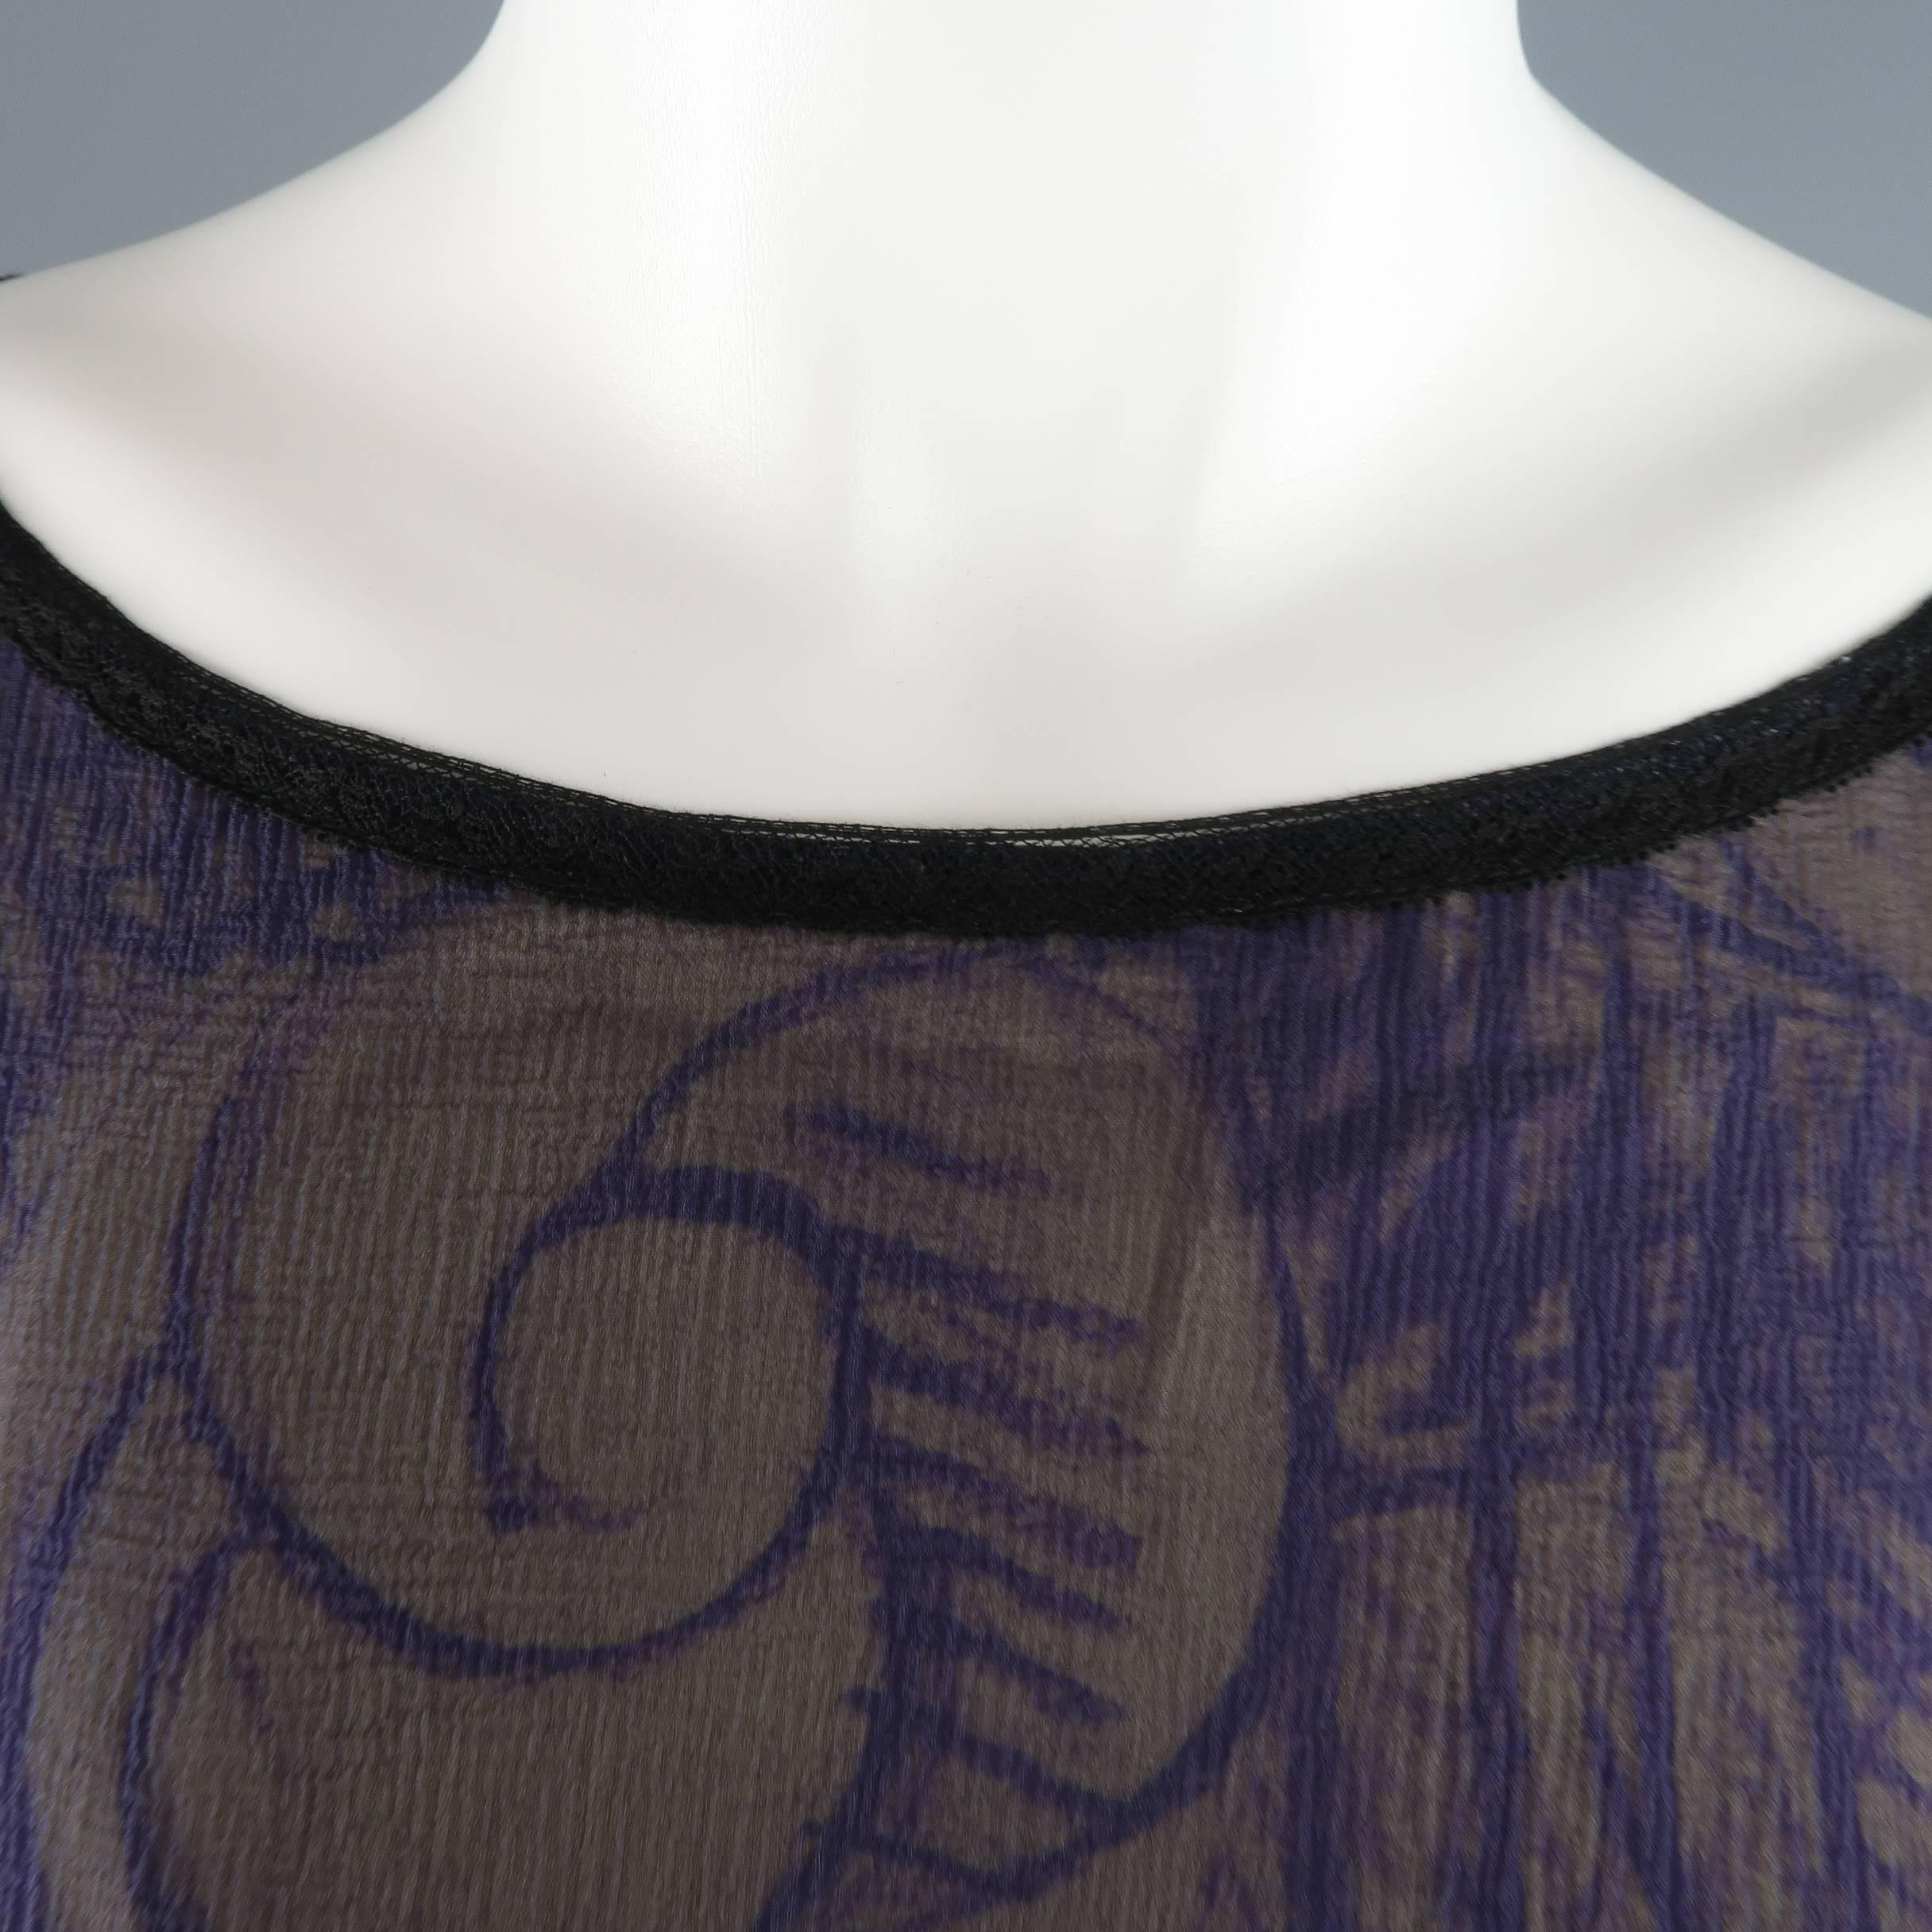 CHANEL blouse comes in a beige and purple camellia sketch print silk with sheer chiffon overlay and features a round neckline with black lace trim, oversized silhouette, stitch striped details, and three qharted sleeves. Imperfection repaired on